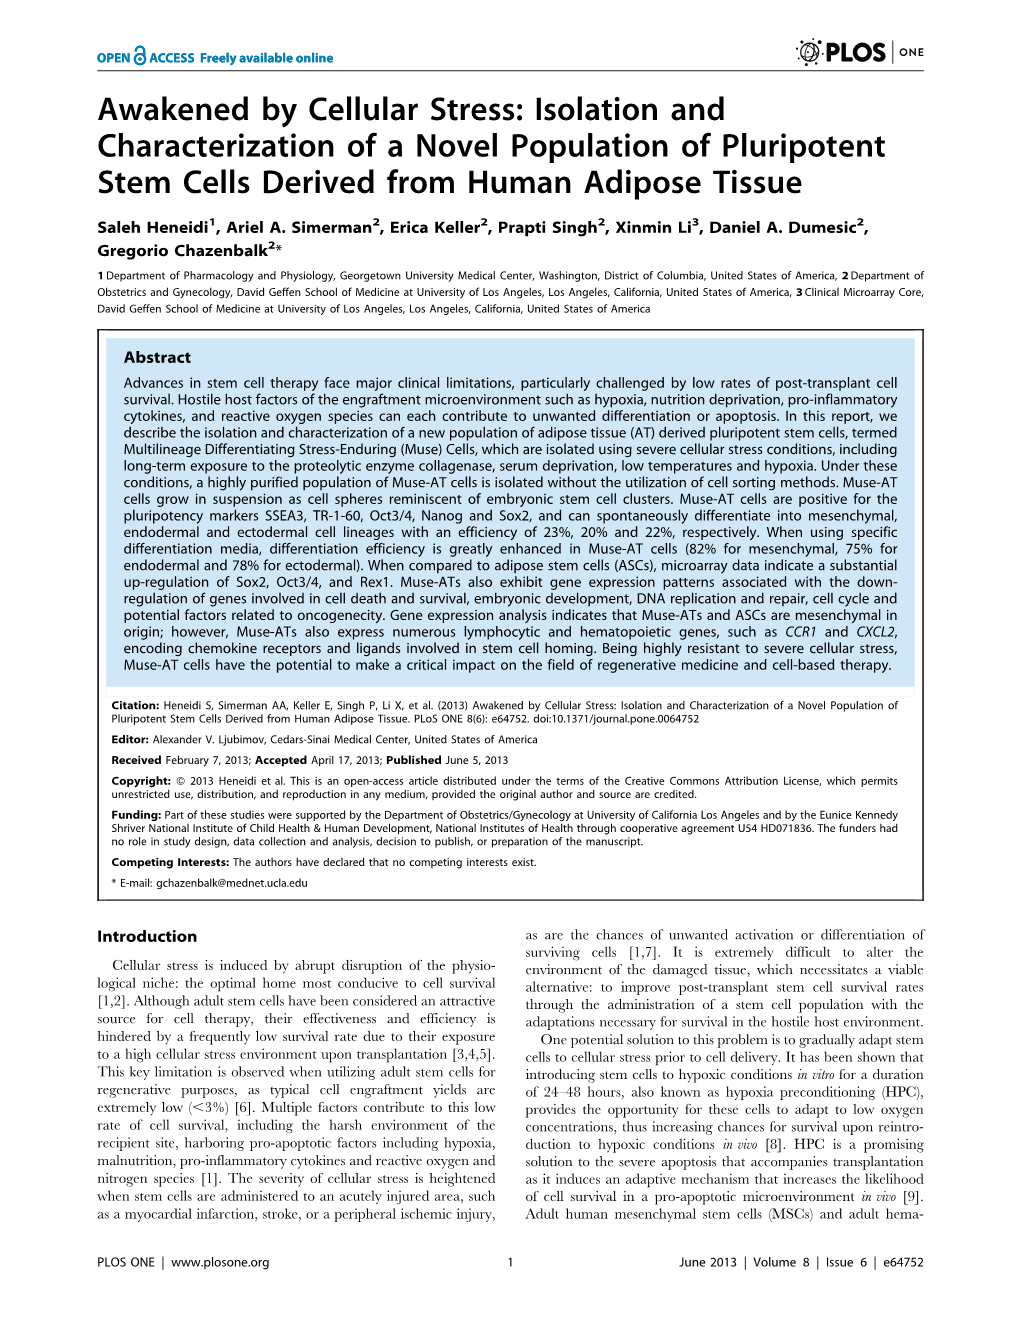 Awakened by Cellular Stress: Isolation and Characterization of a Novel Population of Pluripotent Stem Cells Derived from Human Adipose Tissue